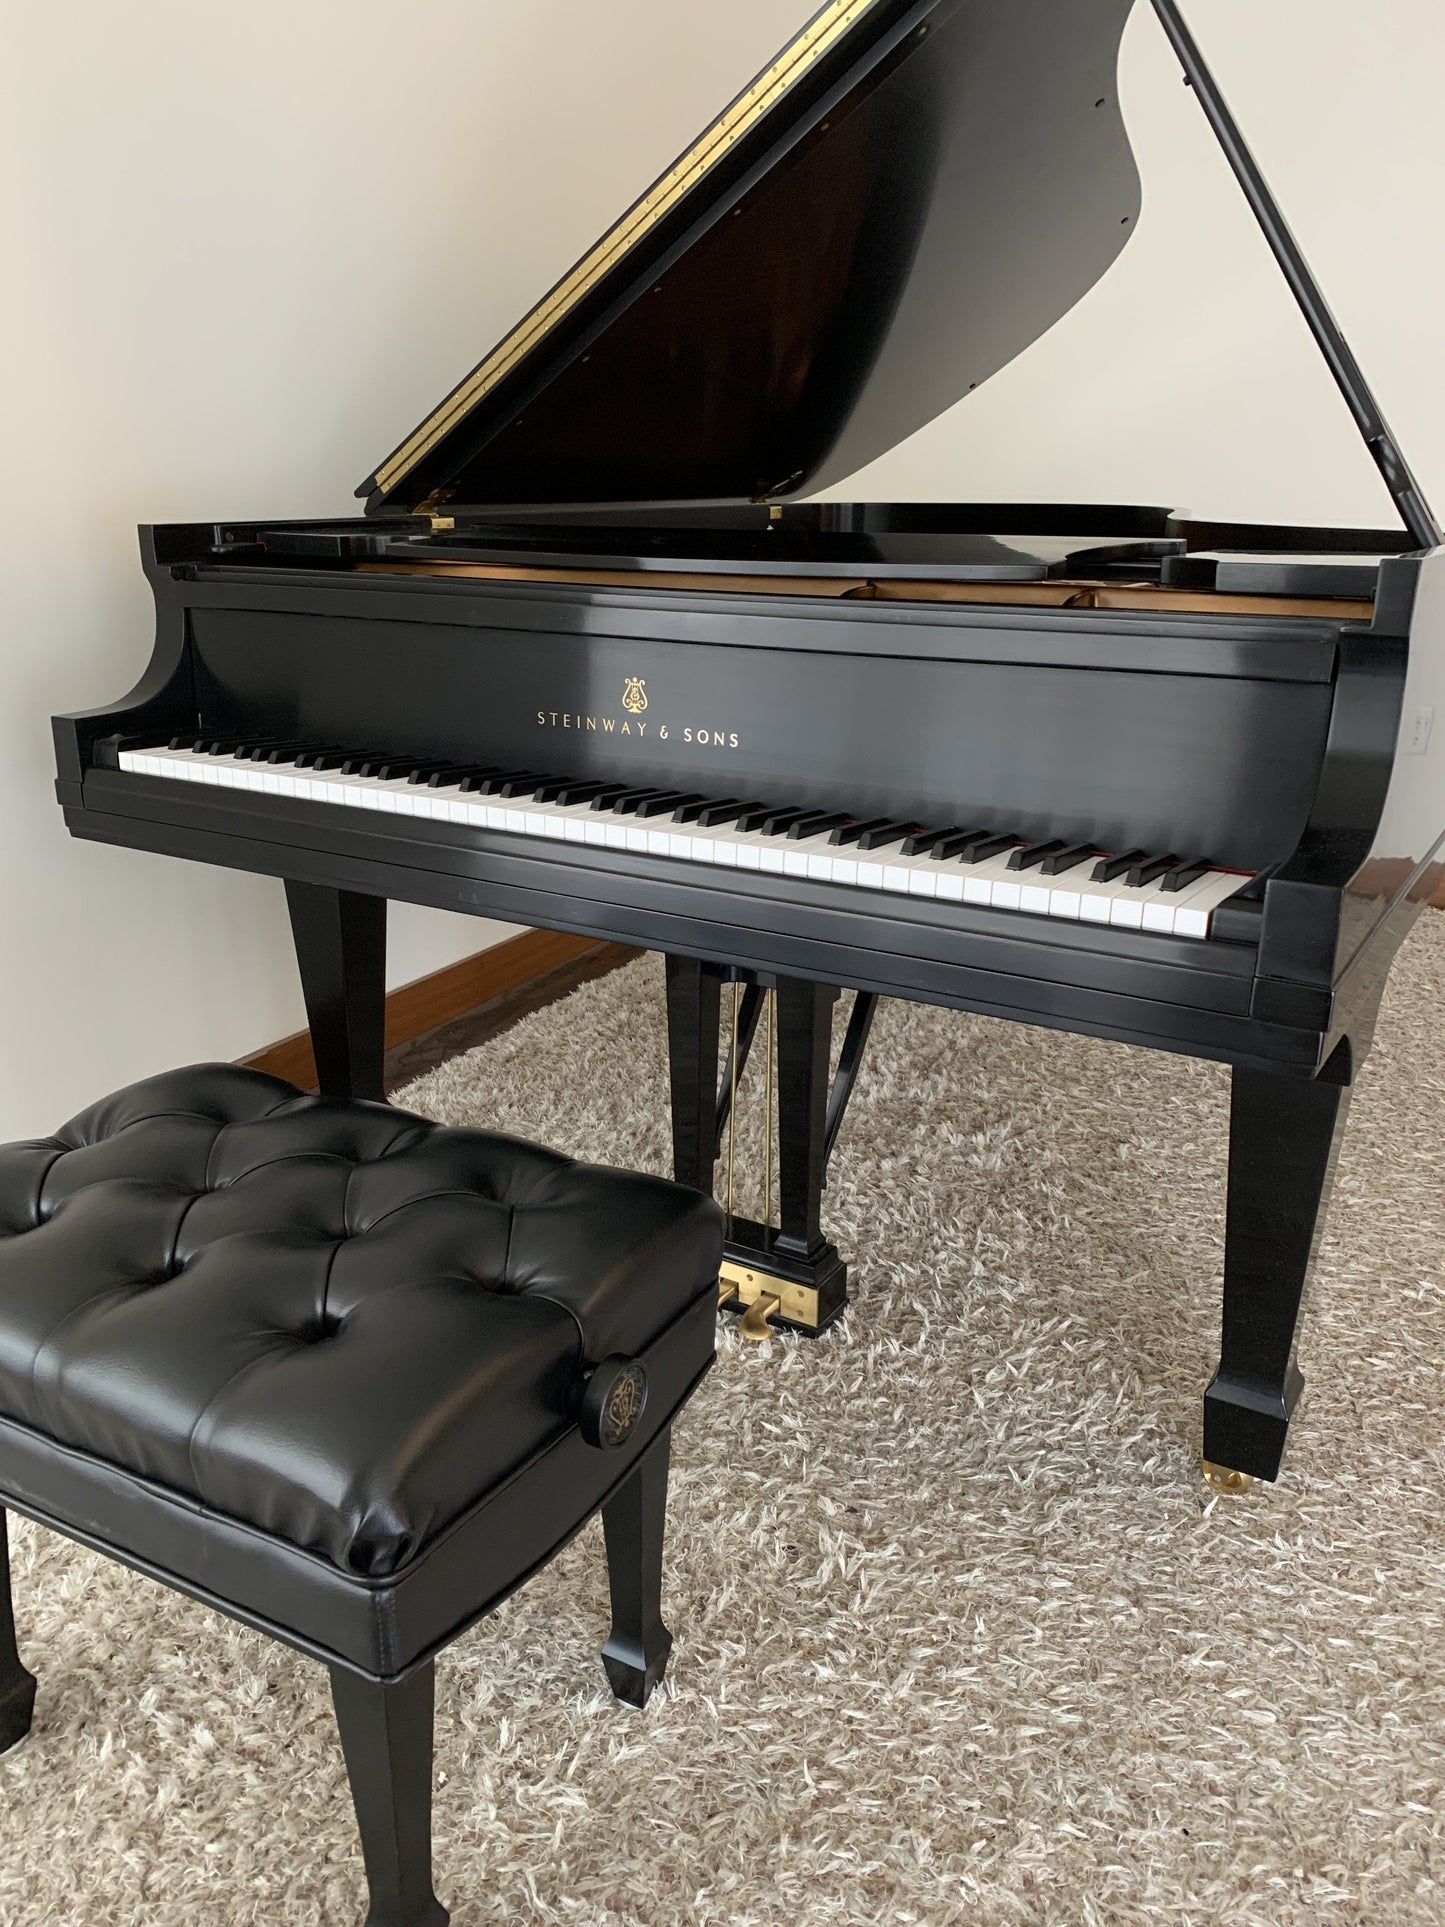 Used Steinway Model B Piano Anniversary Edition 2003, Purchased New in 2004